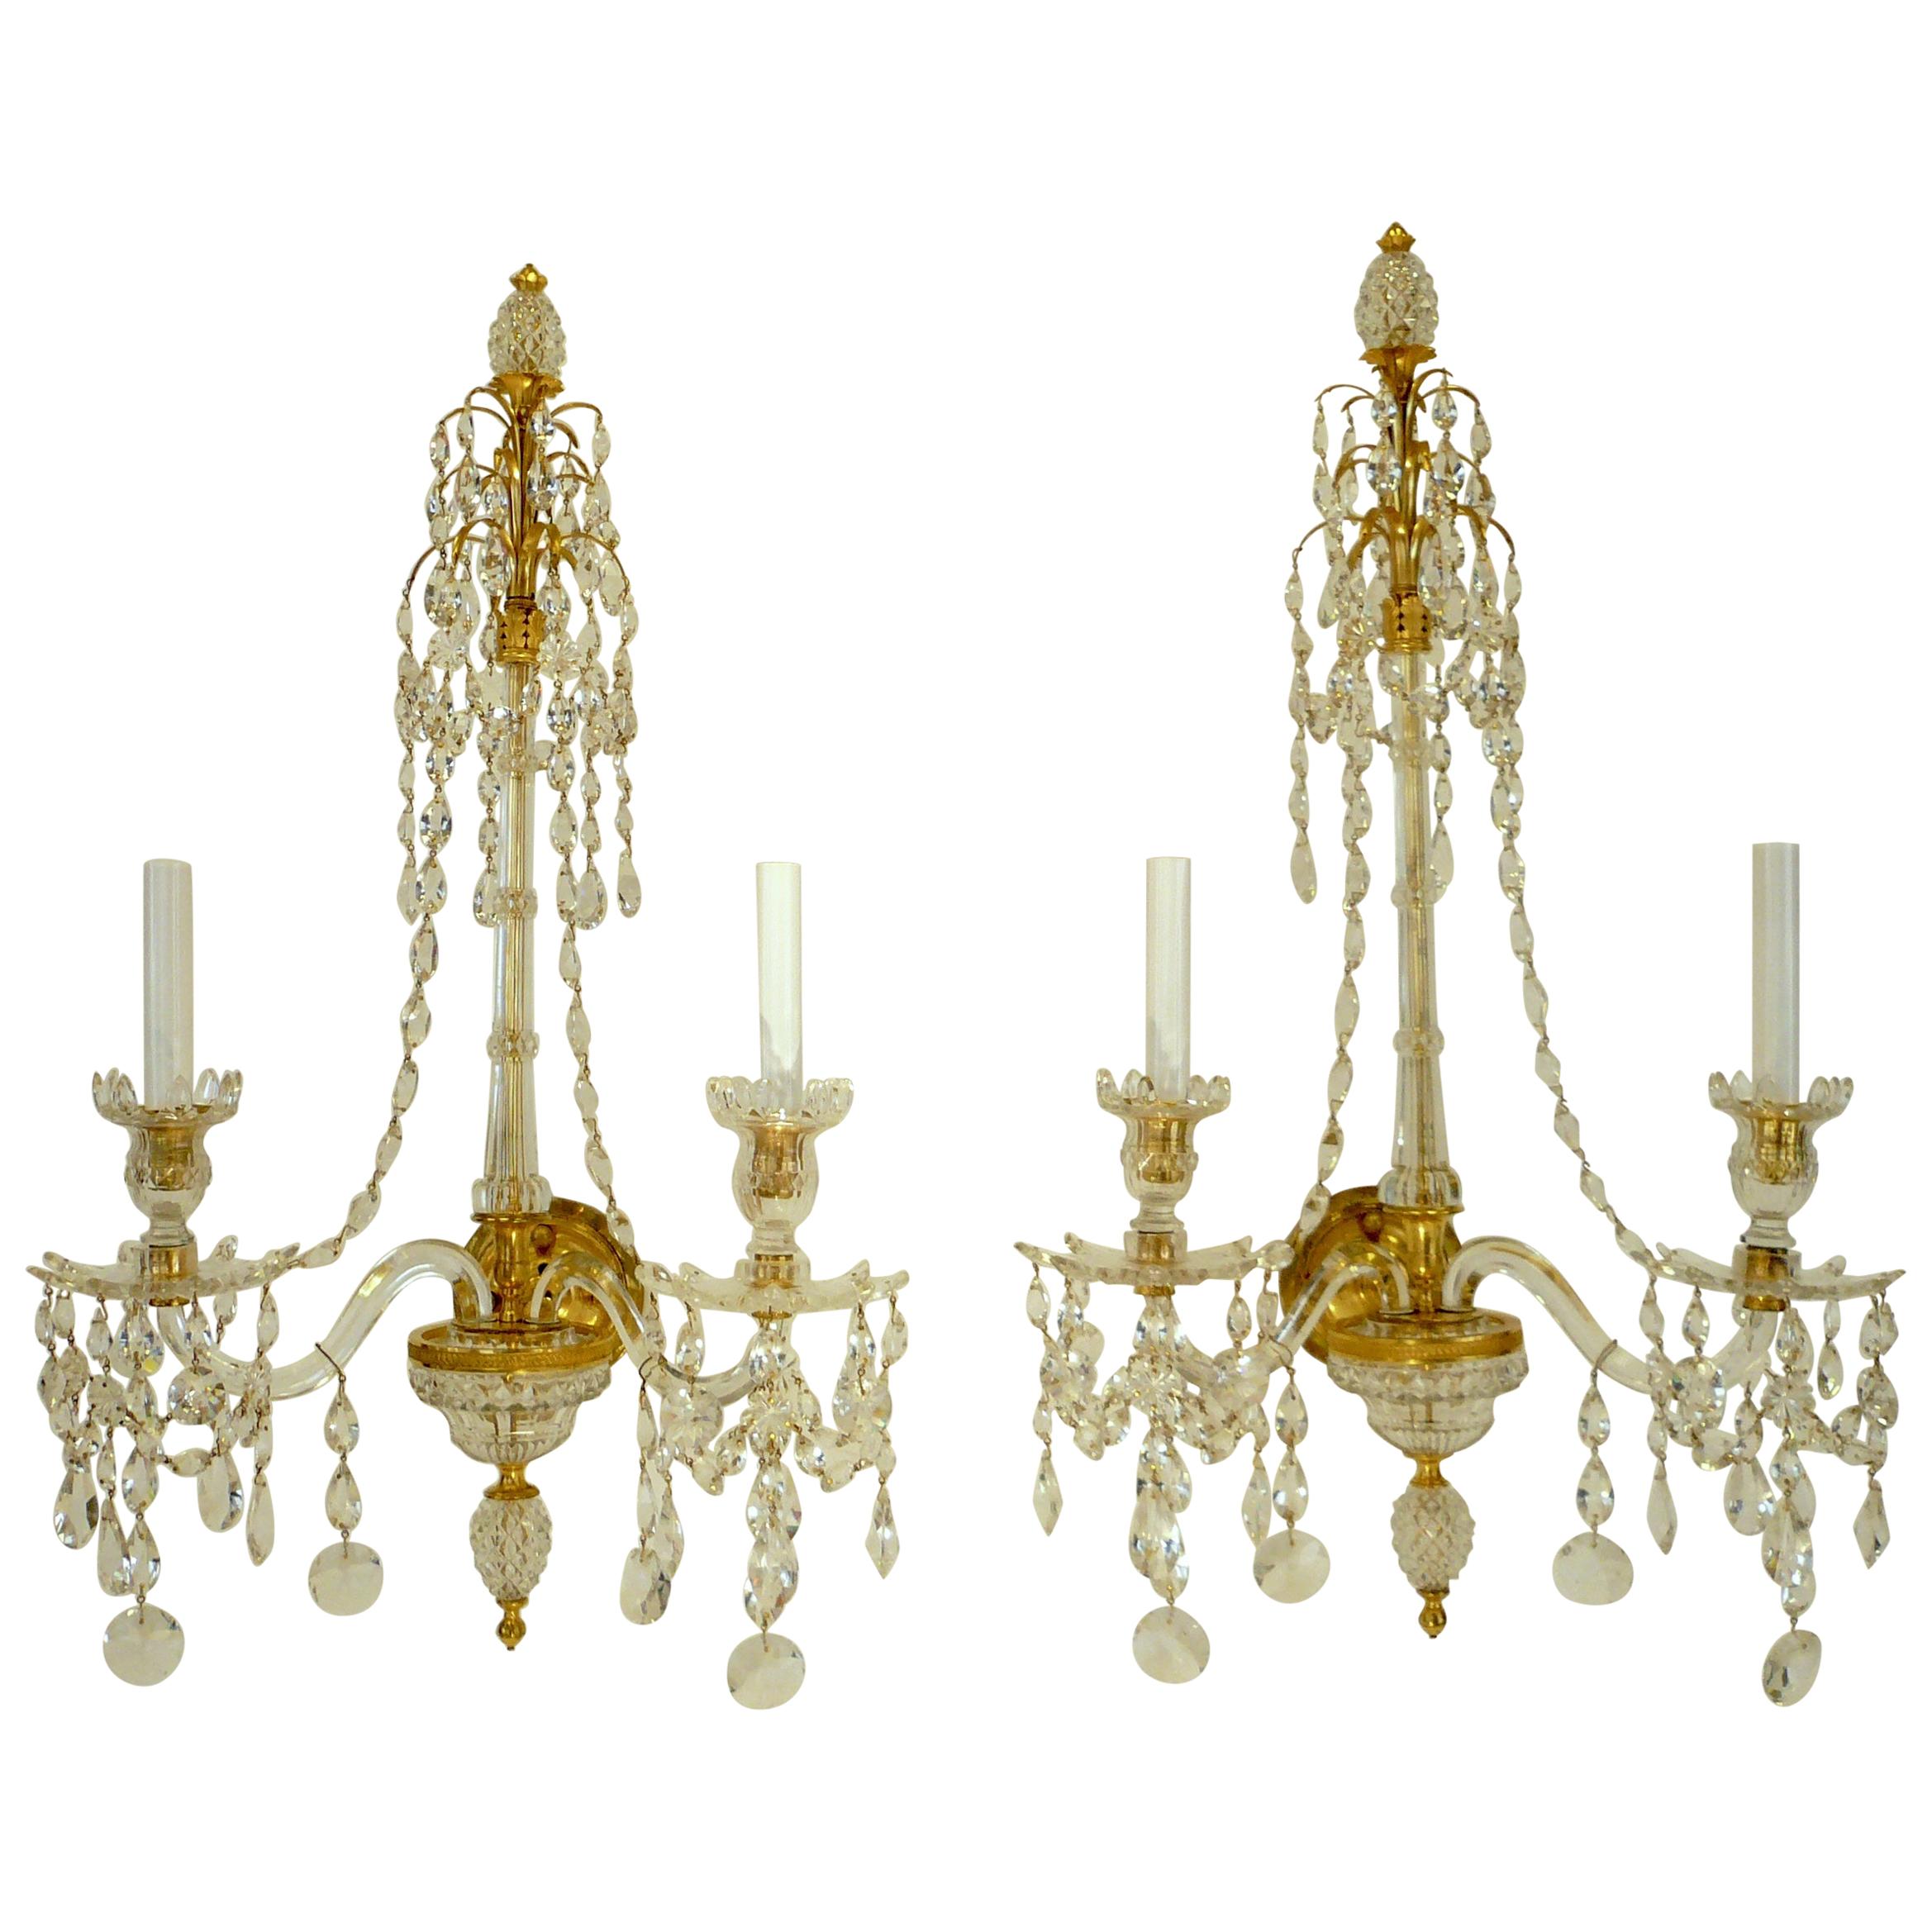 Exquisite Pair of Georgian Sconces in the Adam Style, Attributed to Wm. Parker For Sale